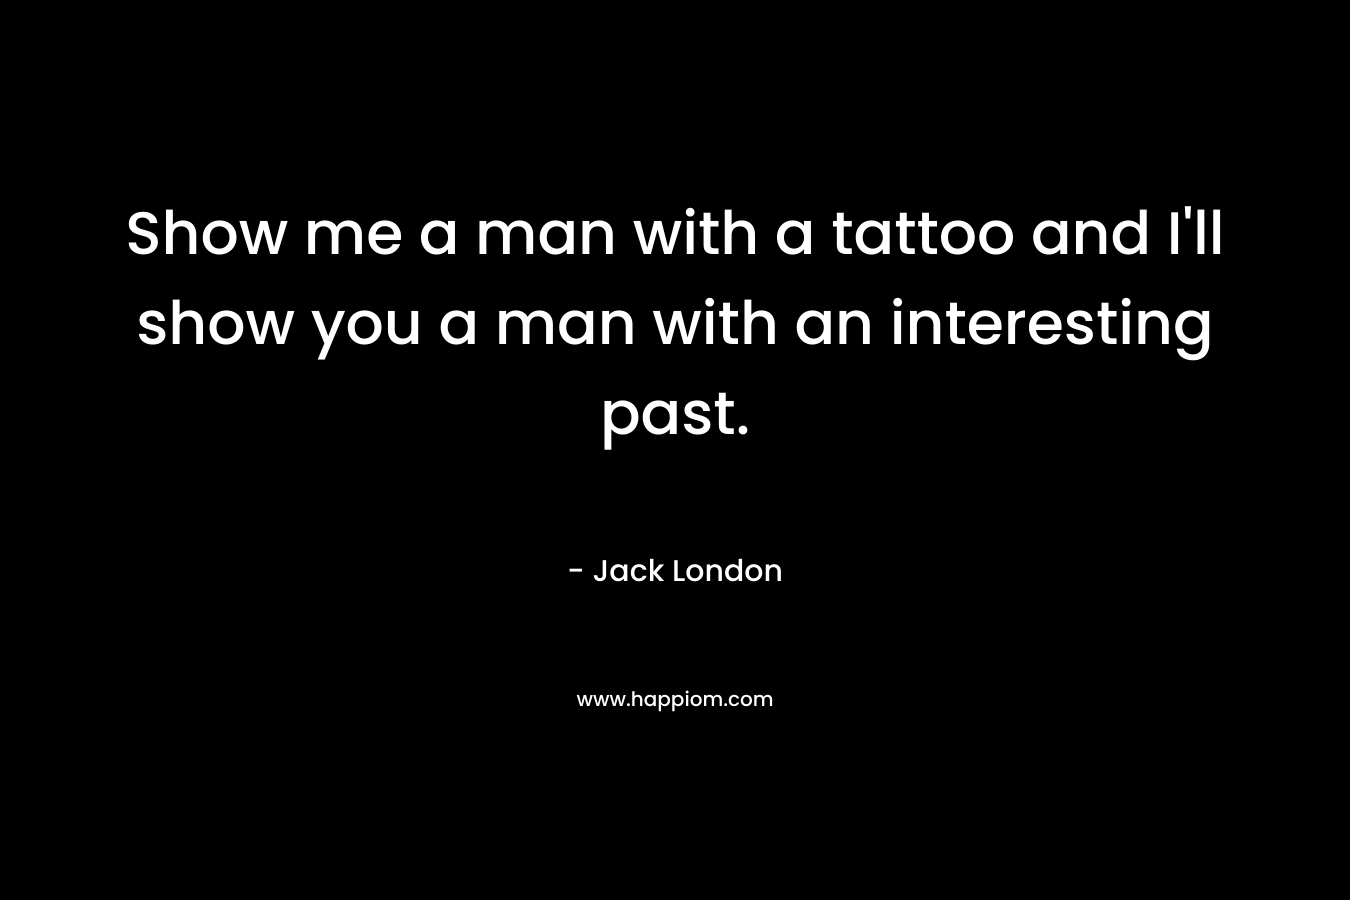 Show me a man with a tattoo and I’ll show you a man with an interesting past. – Jack London